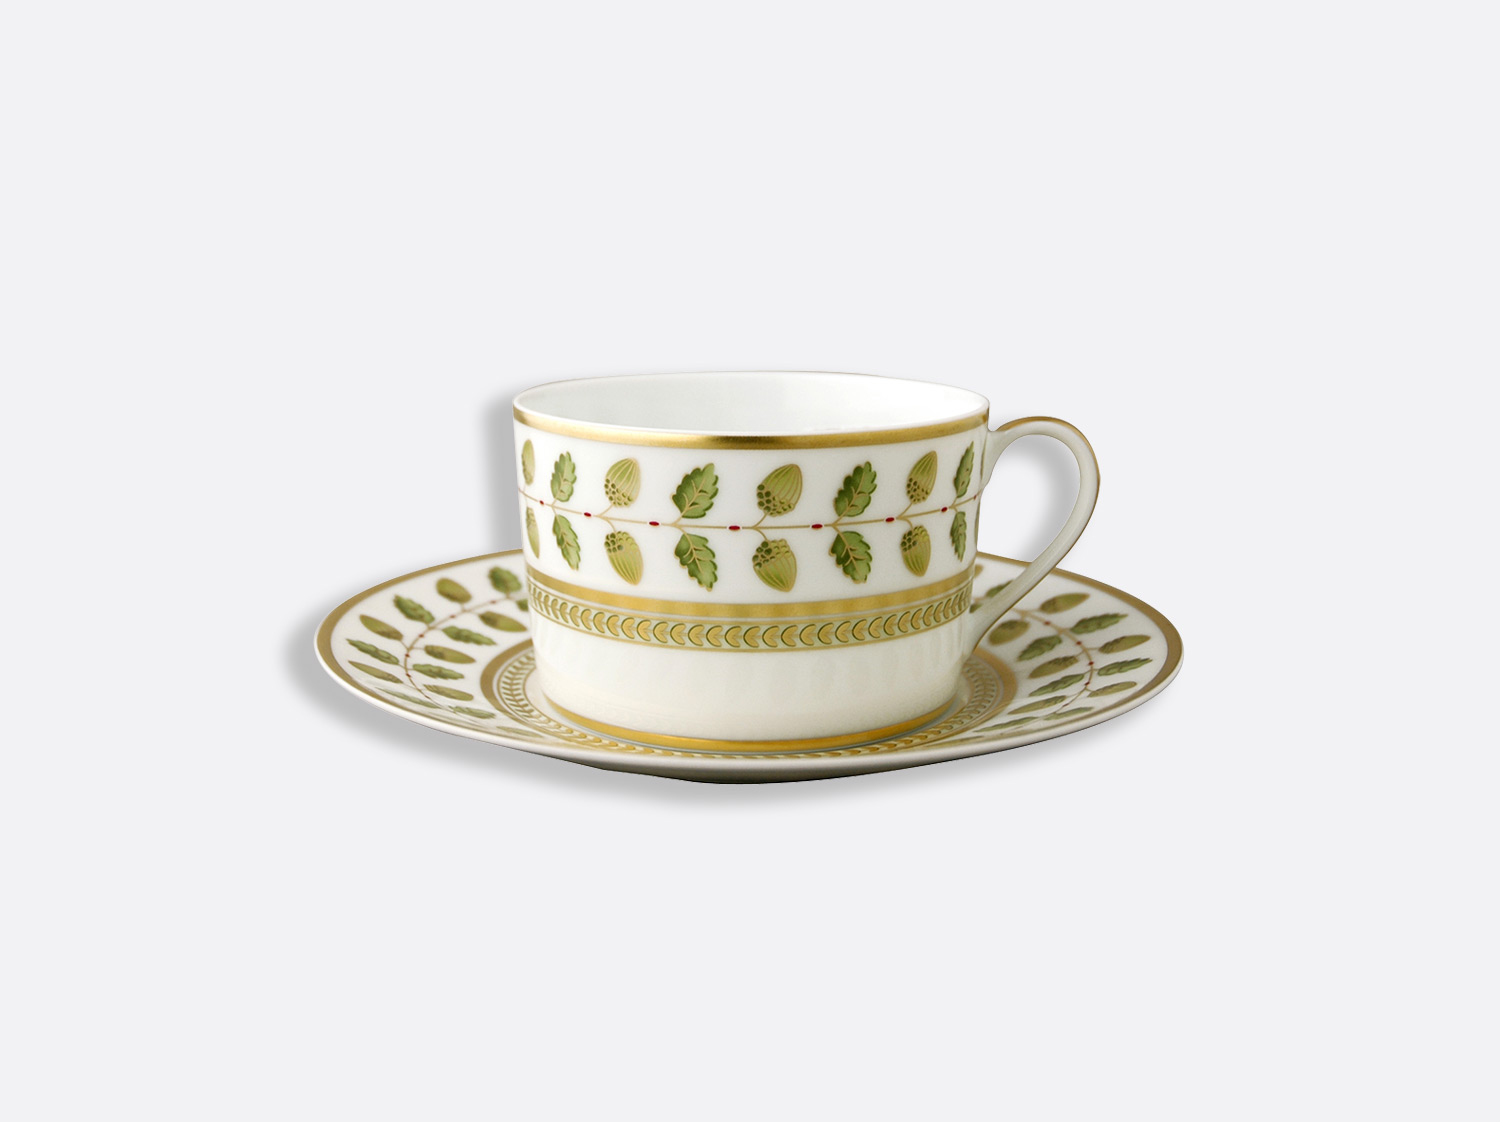 Breakfast cup & saucer 8.5 oz Large Cups